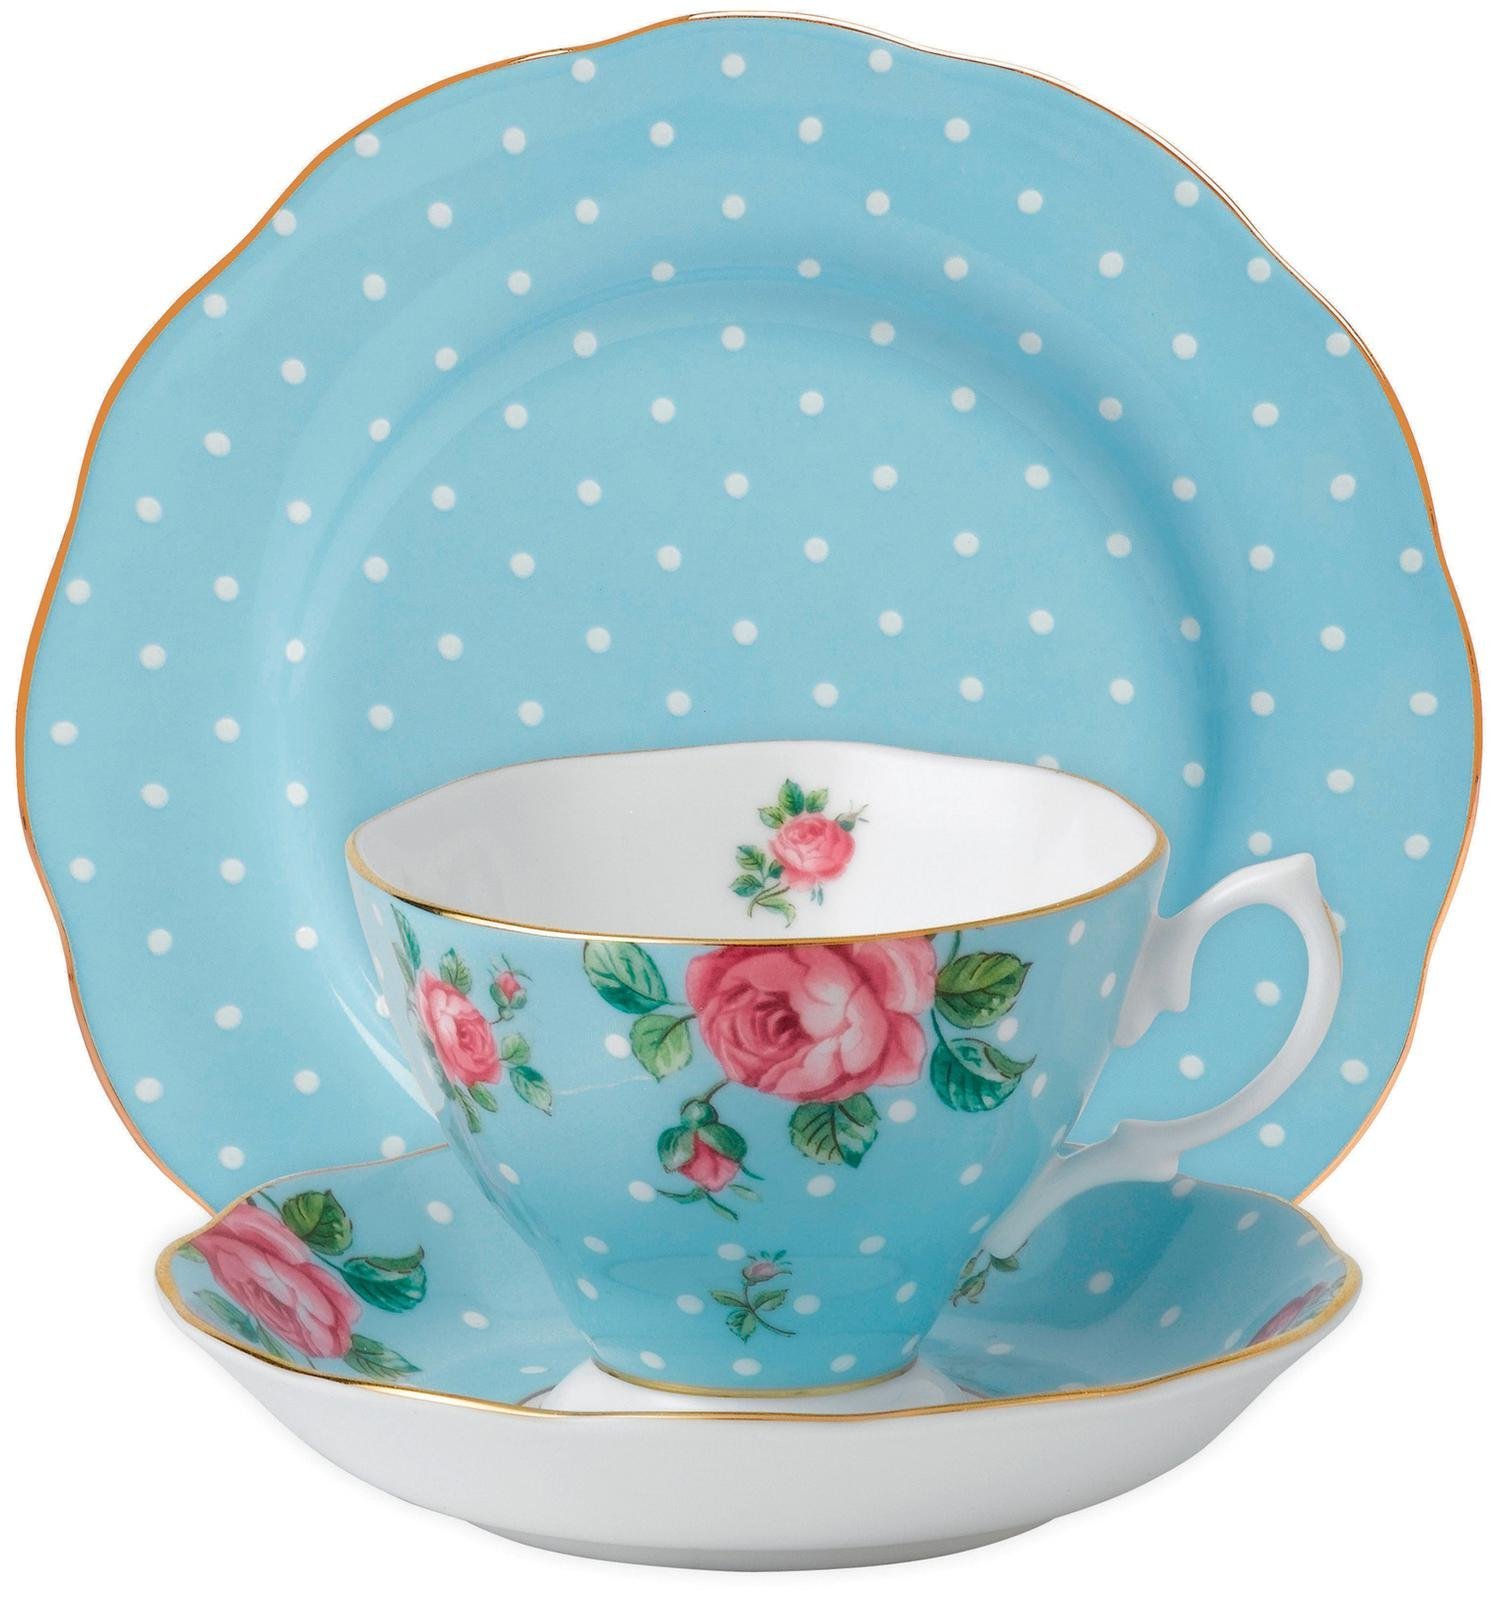 Royal Albert 3-Piece New Country Roses Teacup, Saucer and Plate Set, Polka Blue